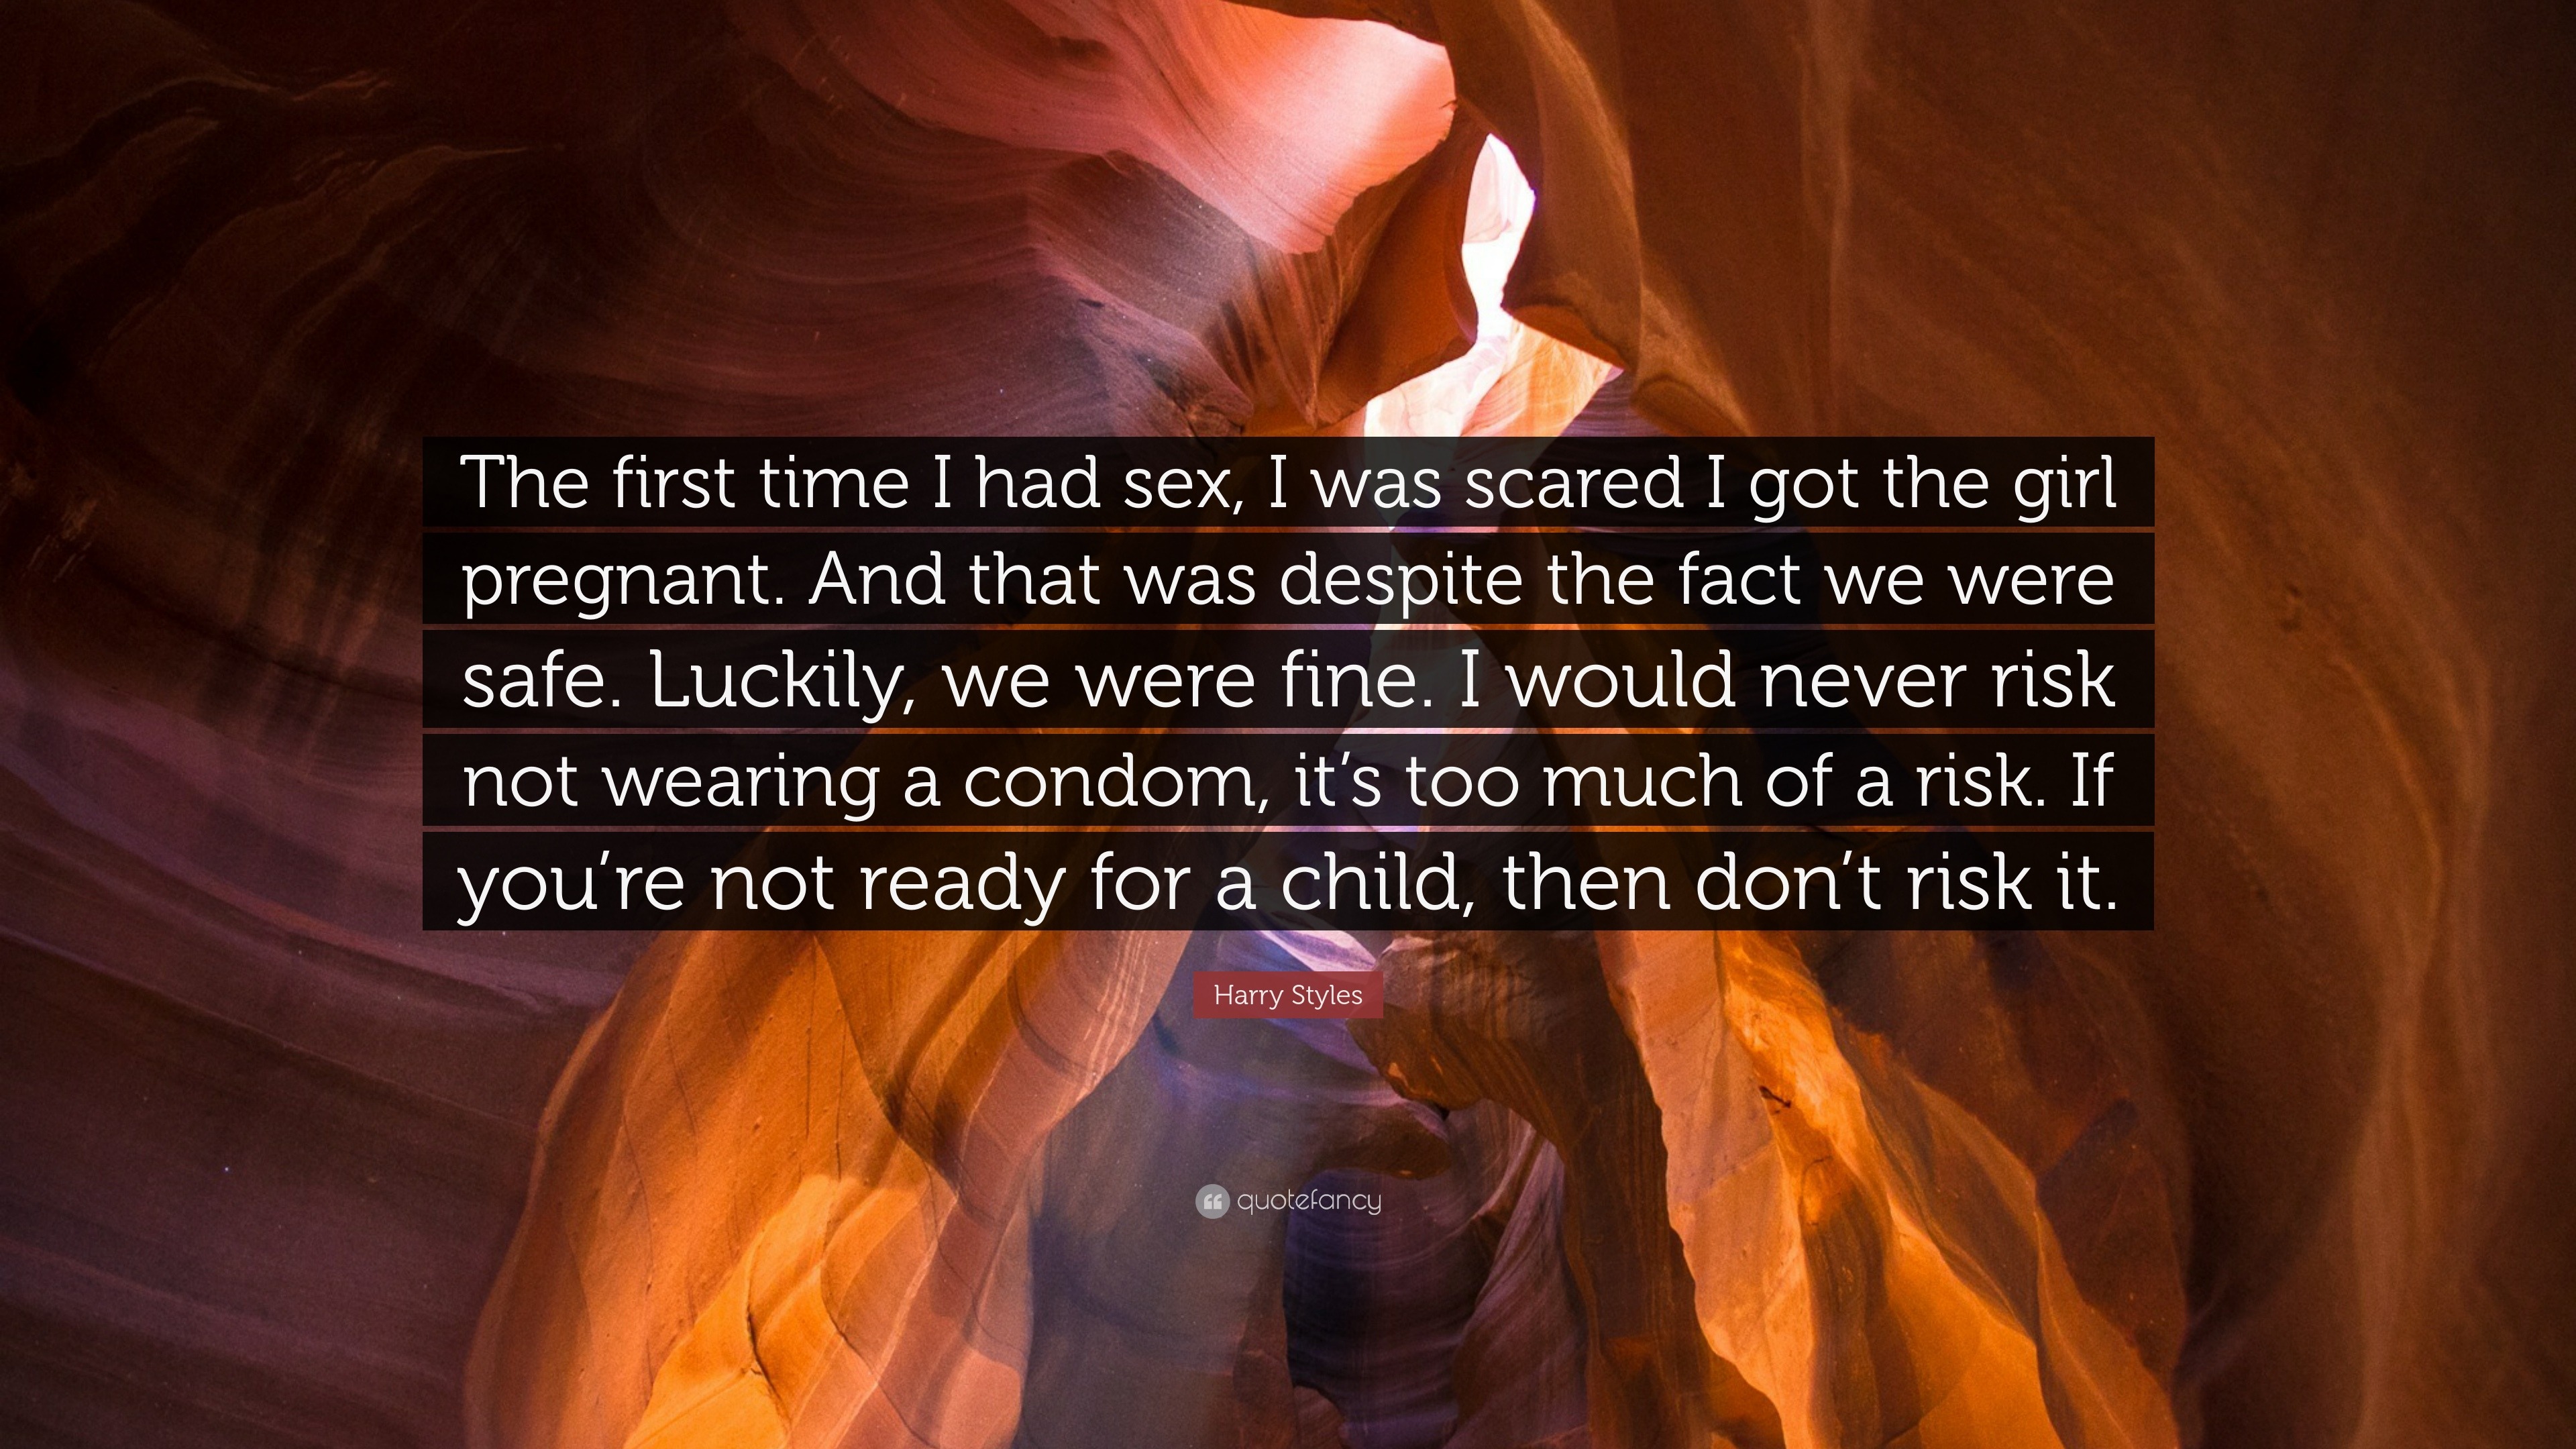 Harry Styles Quote “the First Time I Had Sex I Was Scared I Got The